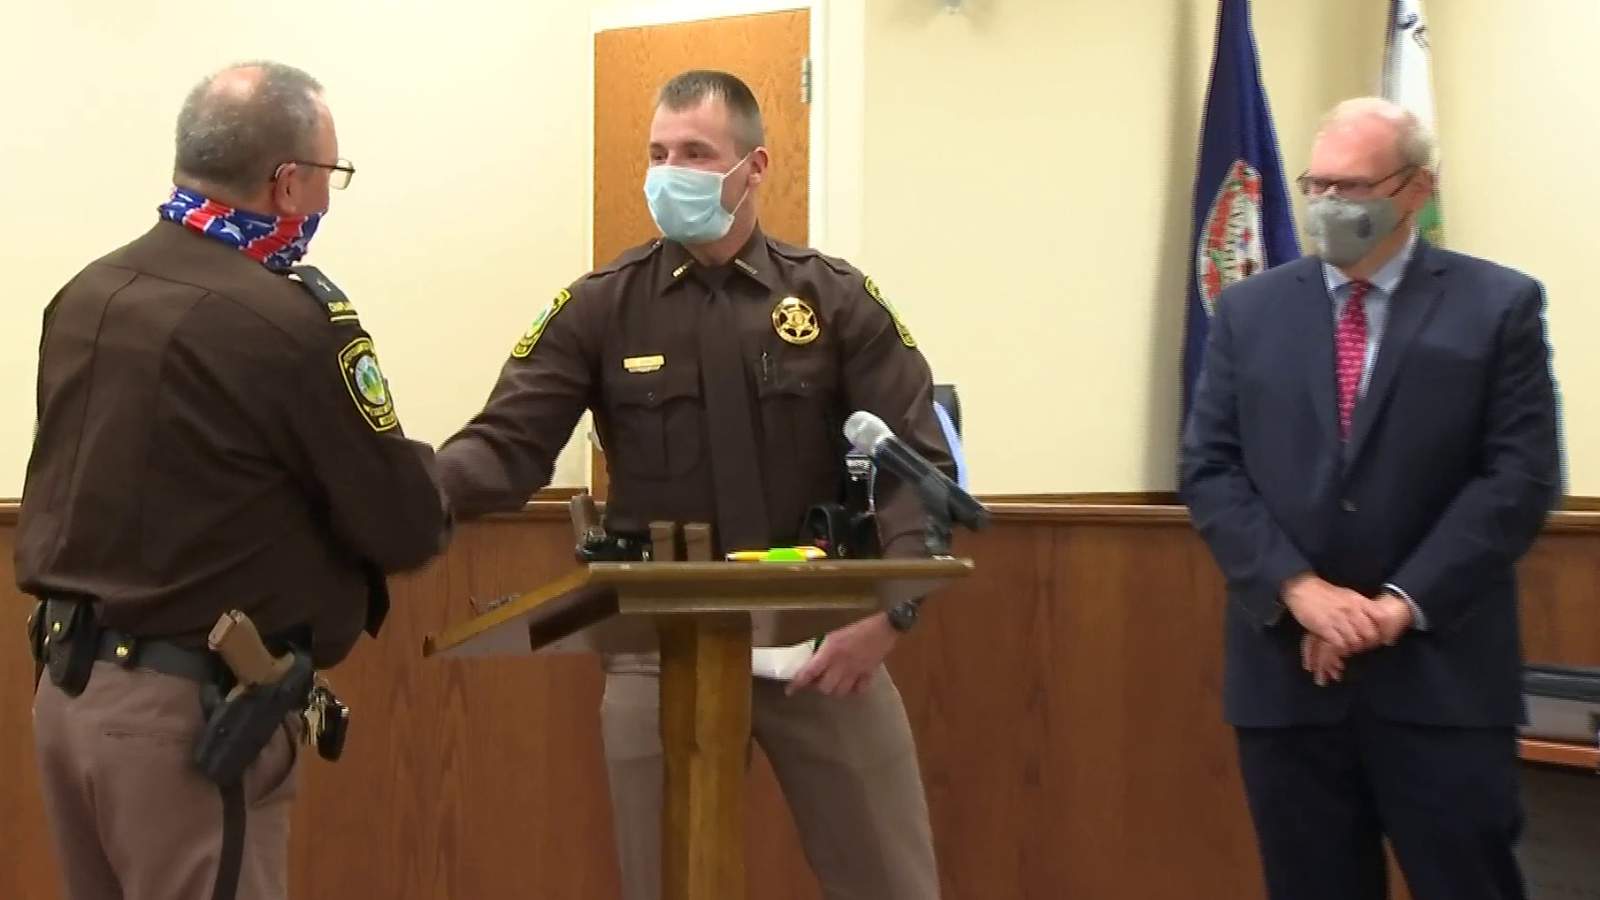 Wythe County Deputy earns Congressional Badge of Bravery for heroism in 2018 armed robbery